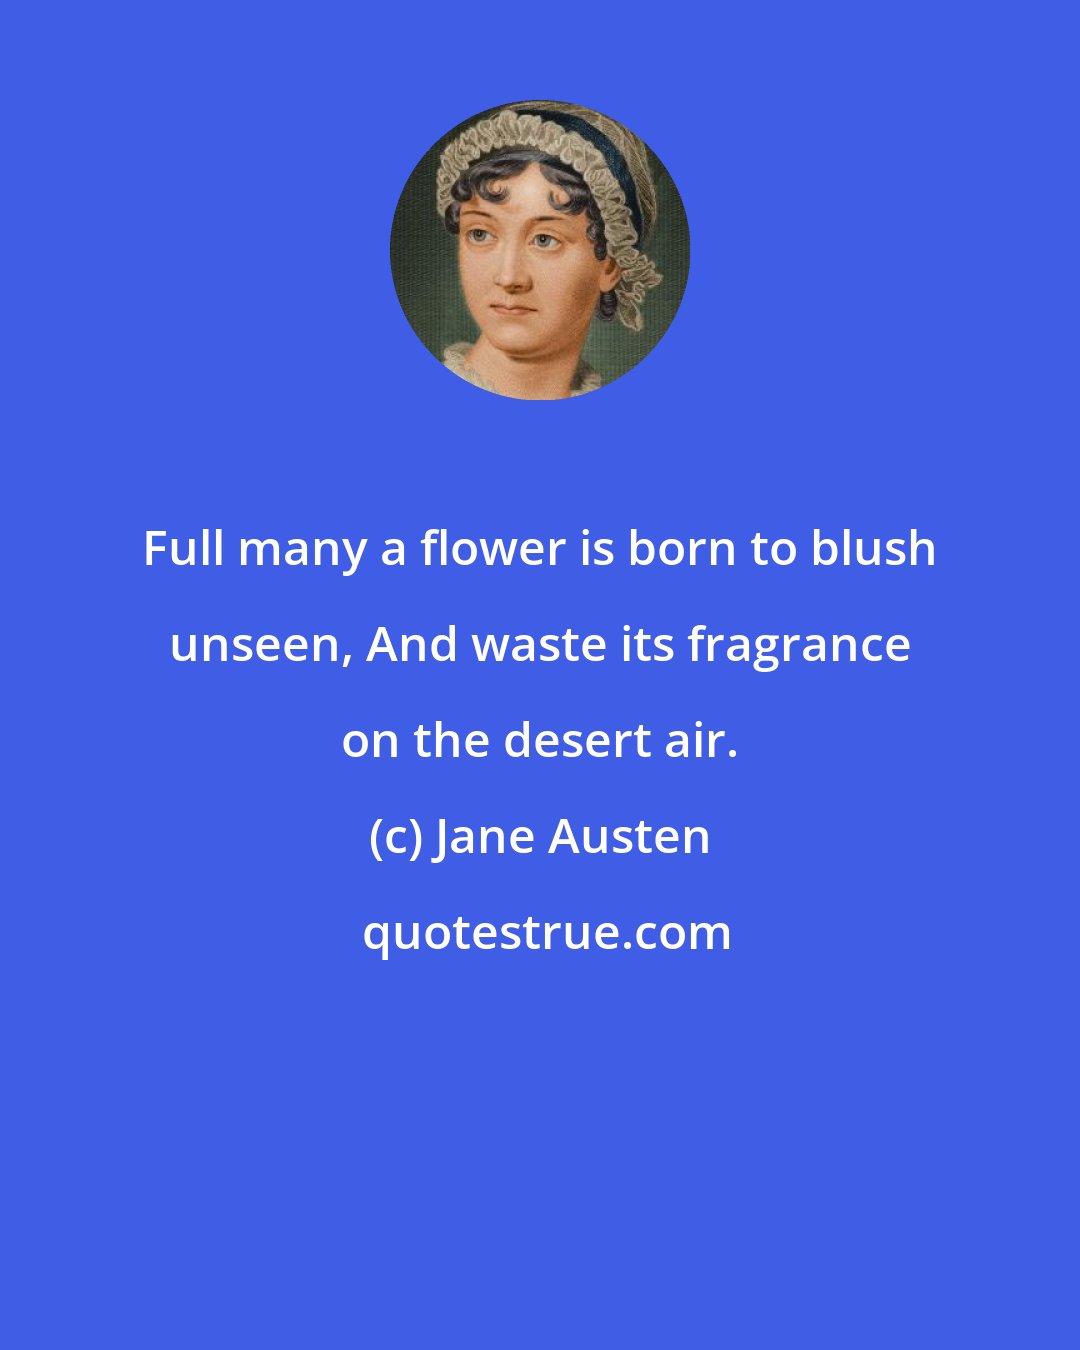 Jane Austen: Full many a flower is born to blush unseen, And waste its fragrance on the desert air.